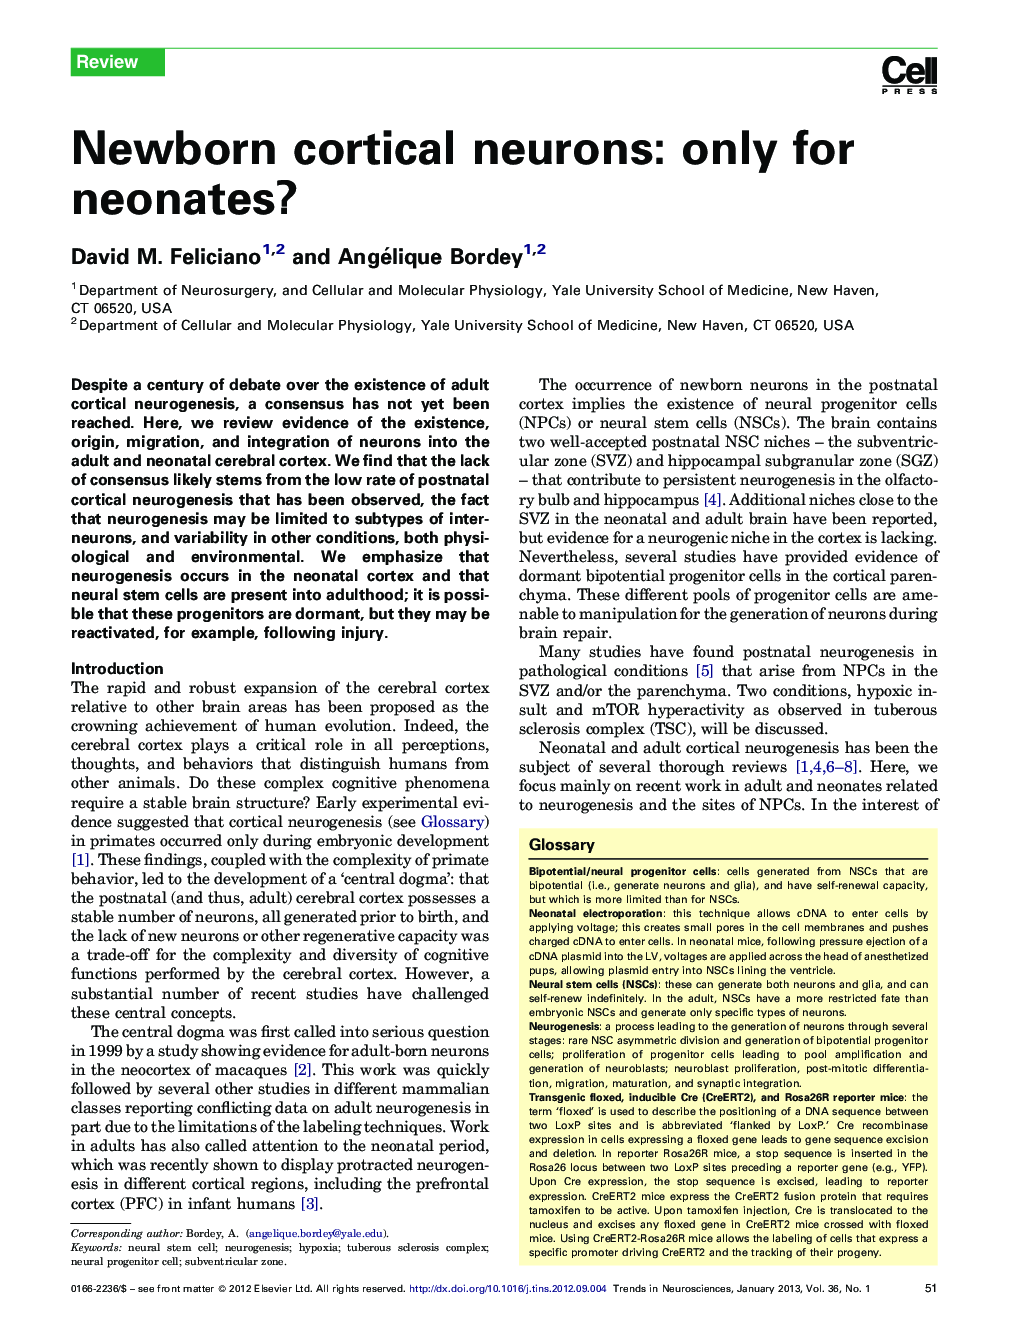 Newborn cortical neurons: only for neonates?